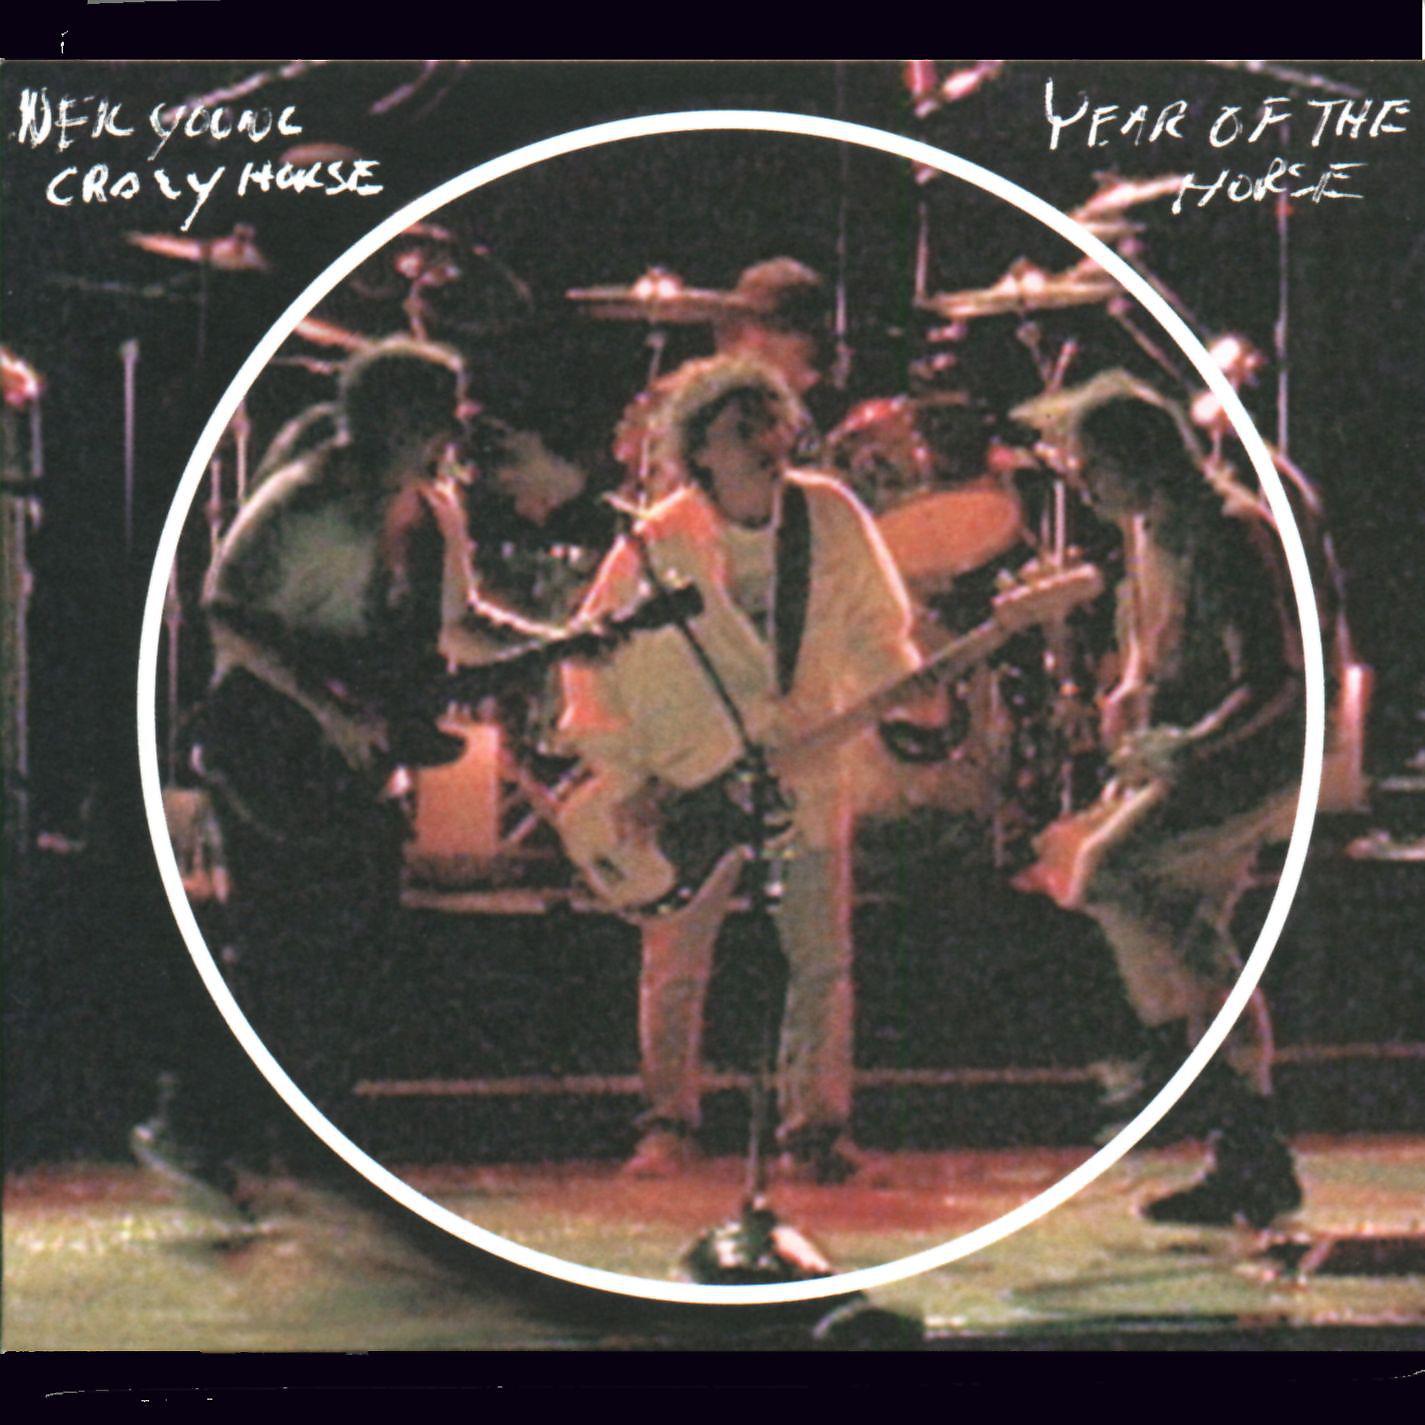 Neil young crazy horse live rust фото 115